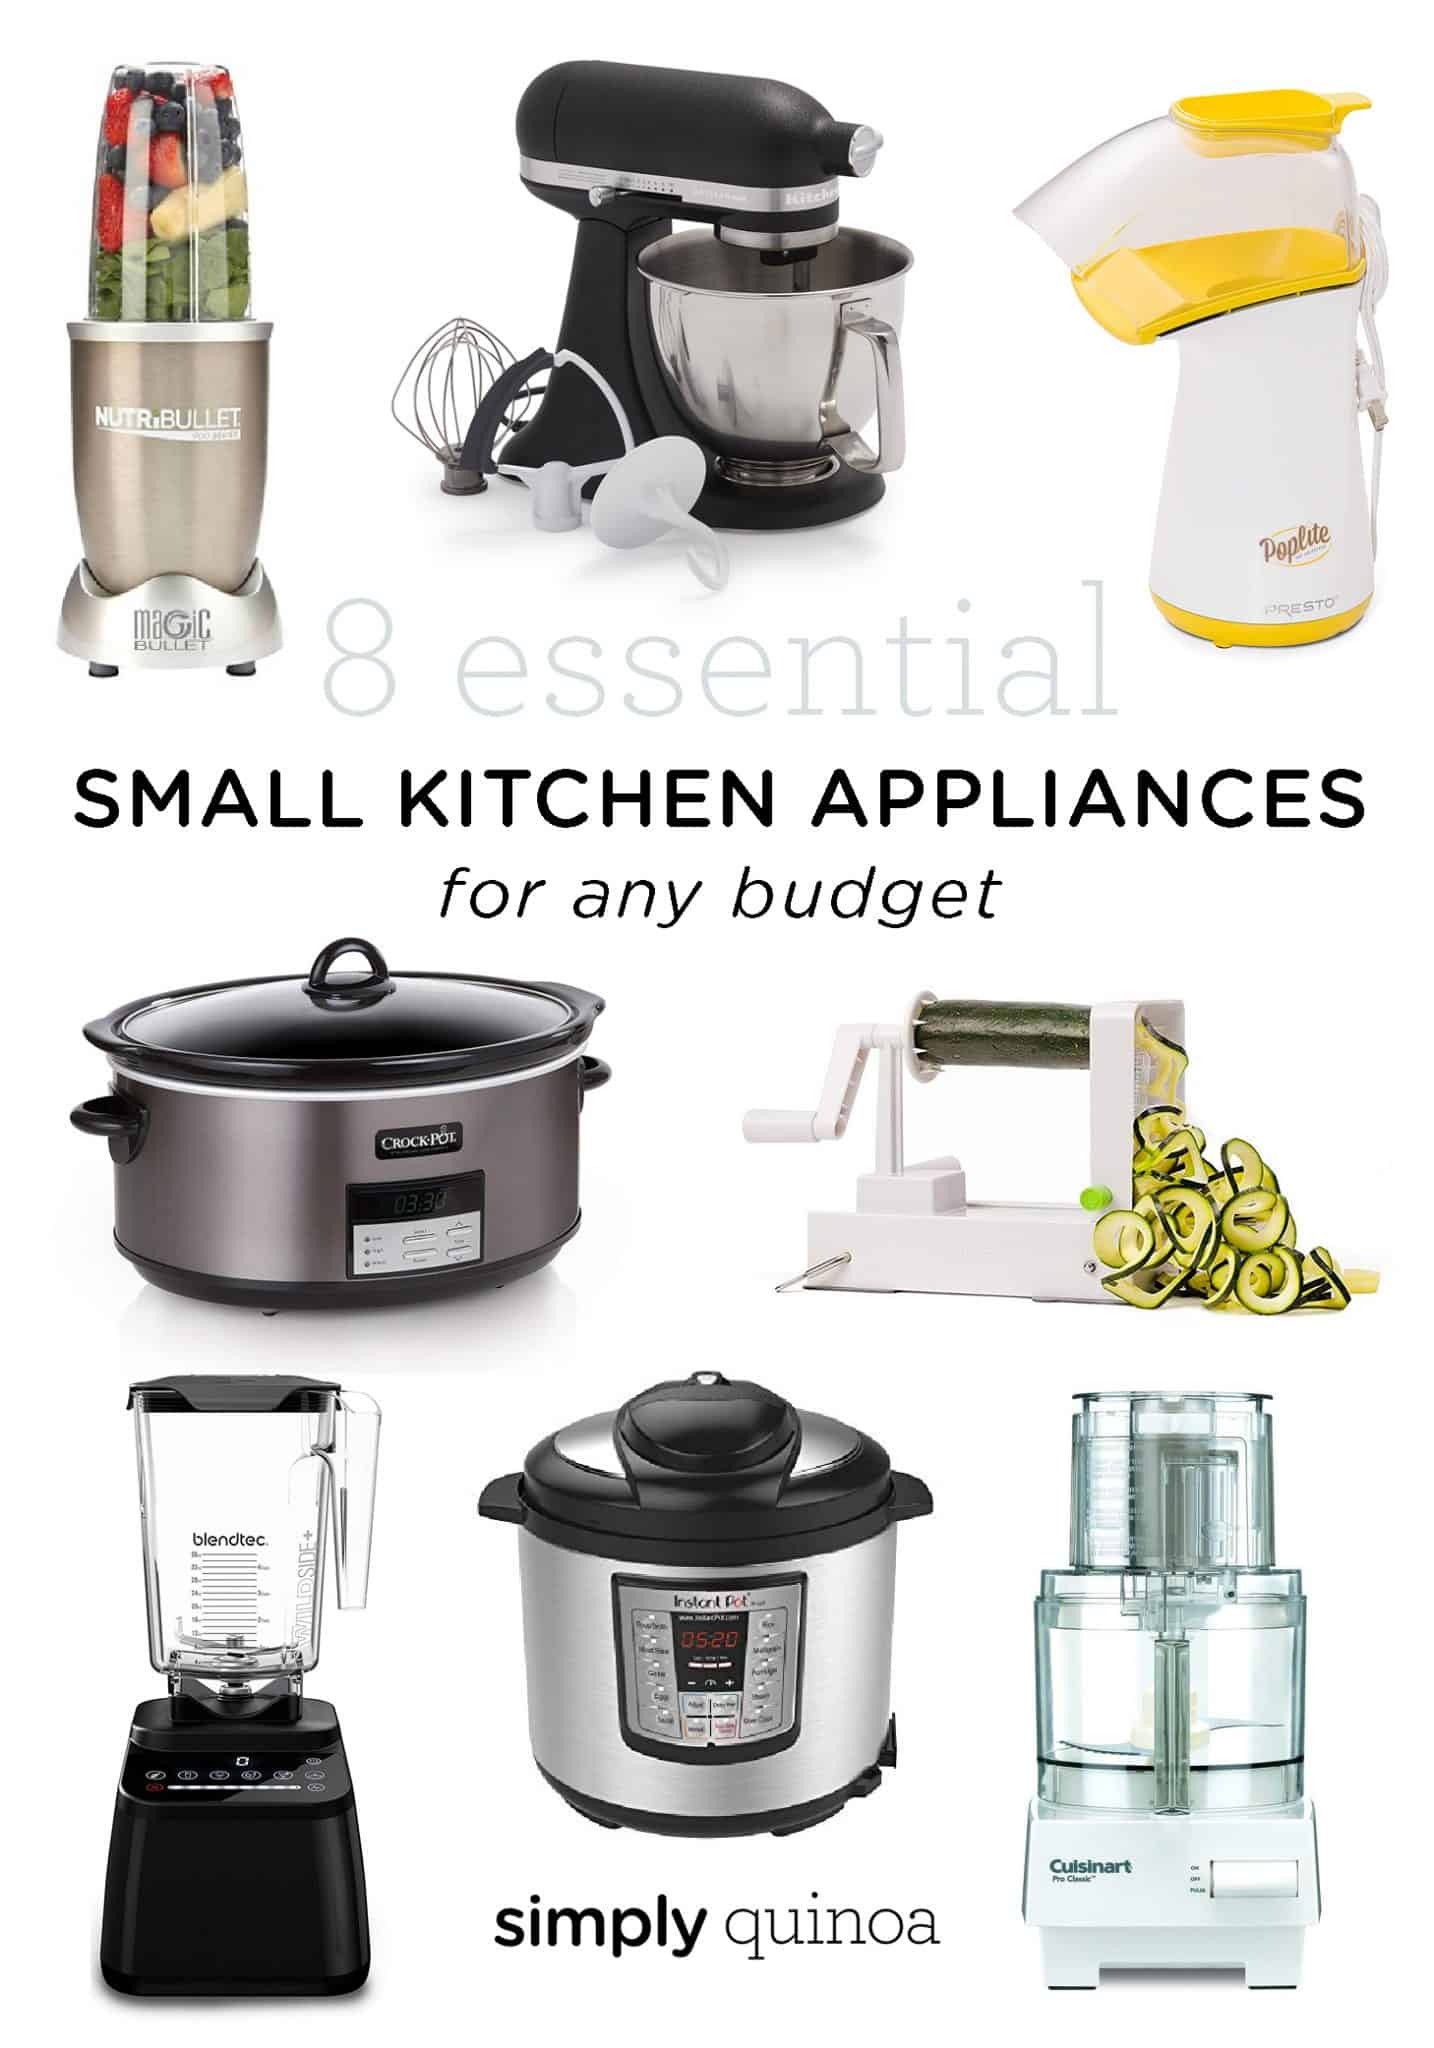 Kitchen Small Applicances Awesome 8 Essential Small Kitchen Appliances for Any Bud